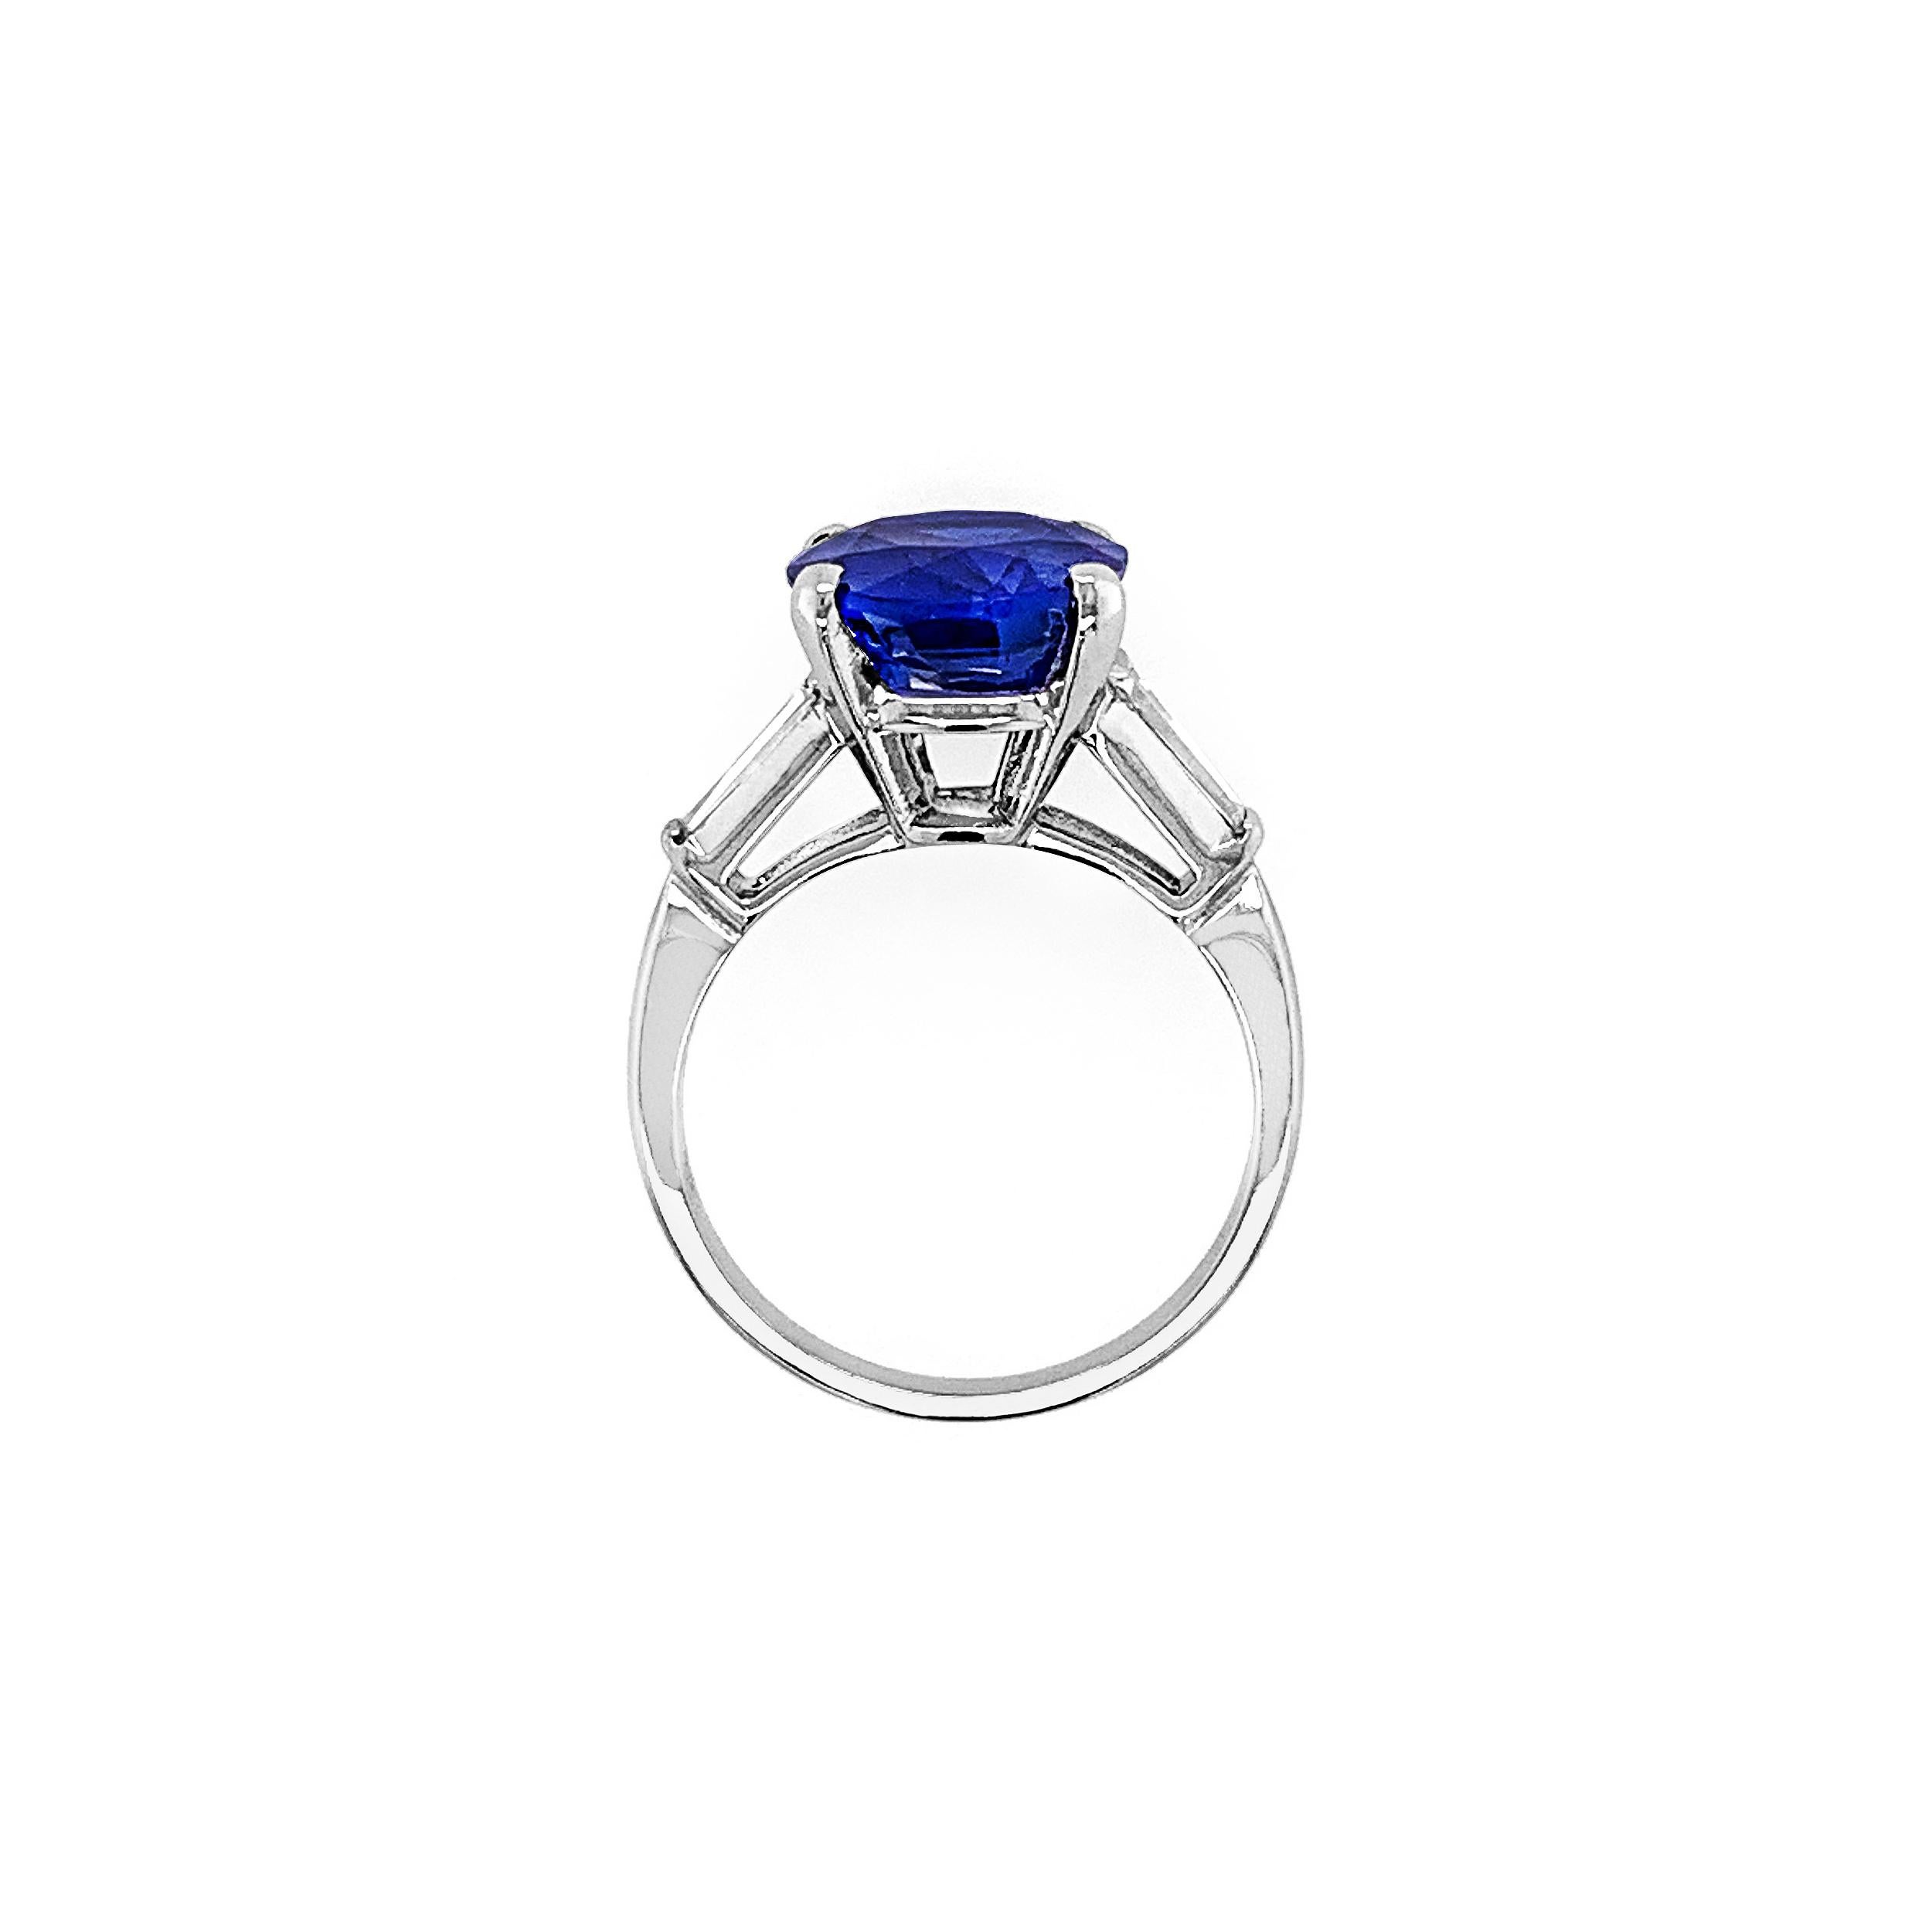 6.04 Carat Oval Sapphire with 0.56 Carat (total weight) Trapeze Side Diamonds in Platinum.